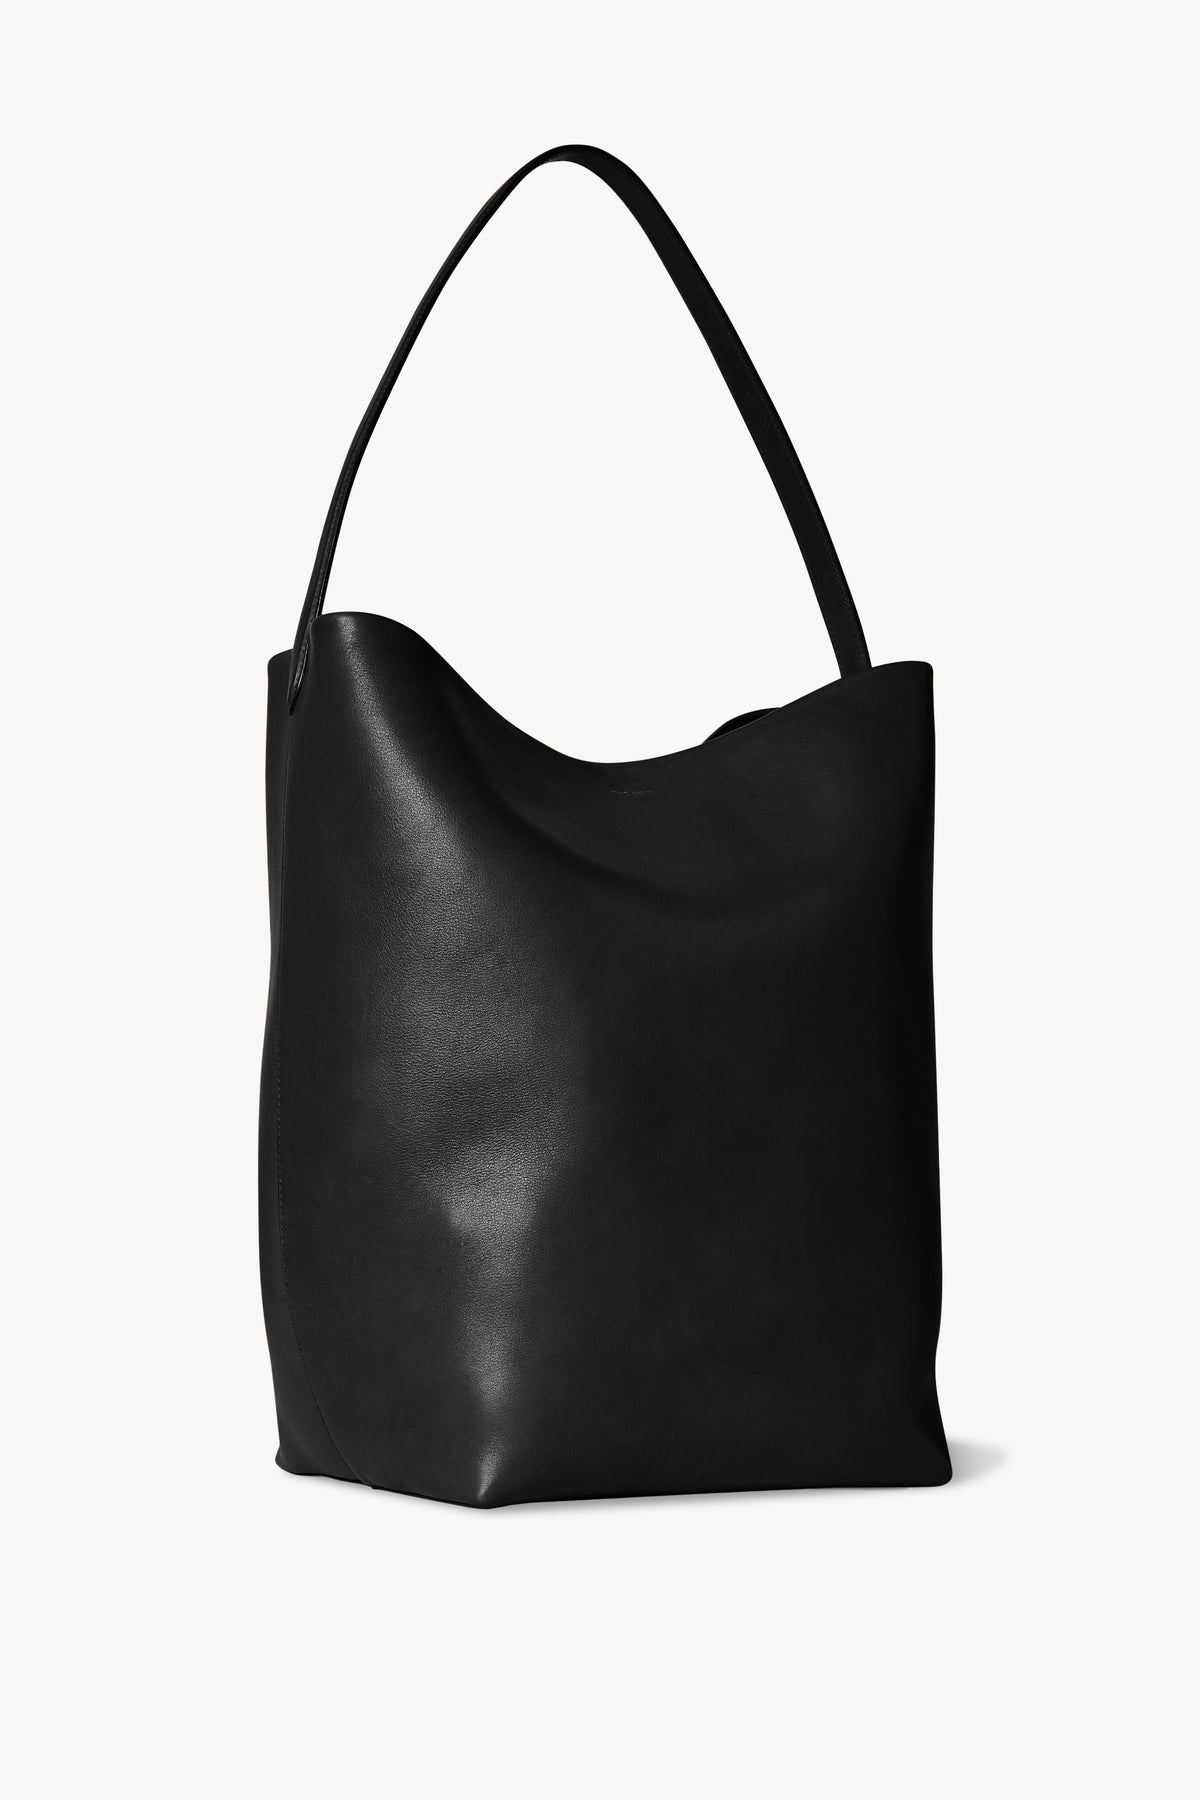 REVIEW - The Row large leather N/S Park tote bag review. Size